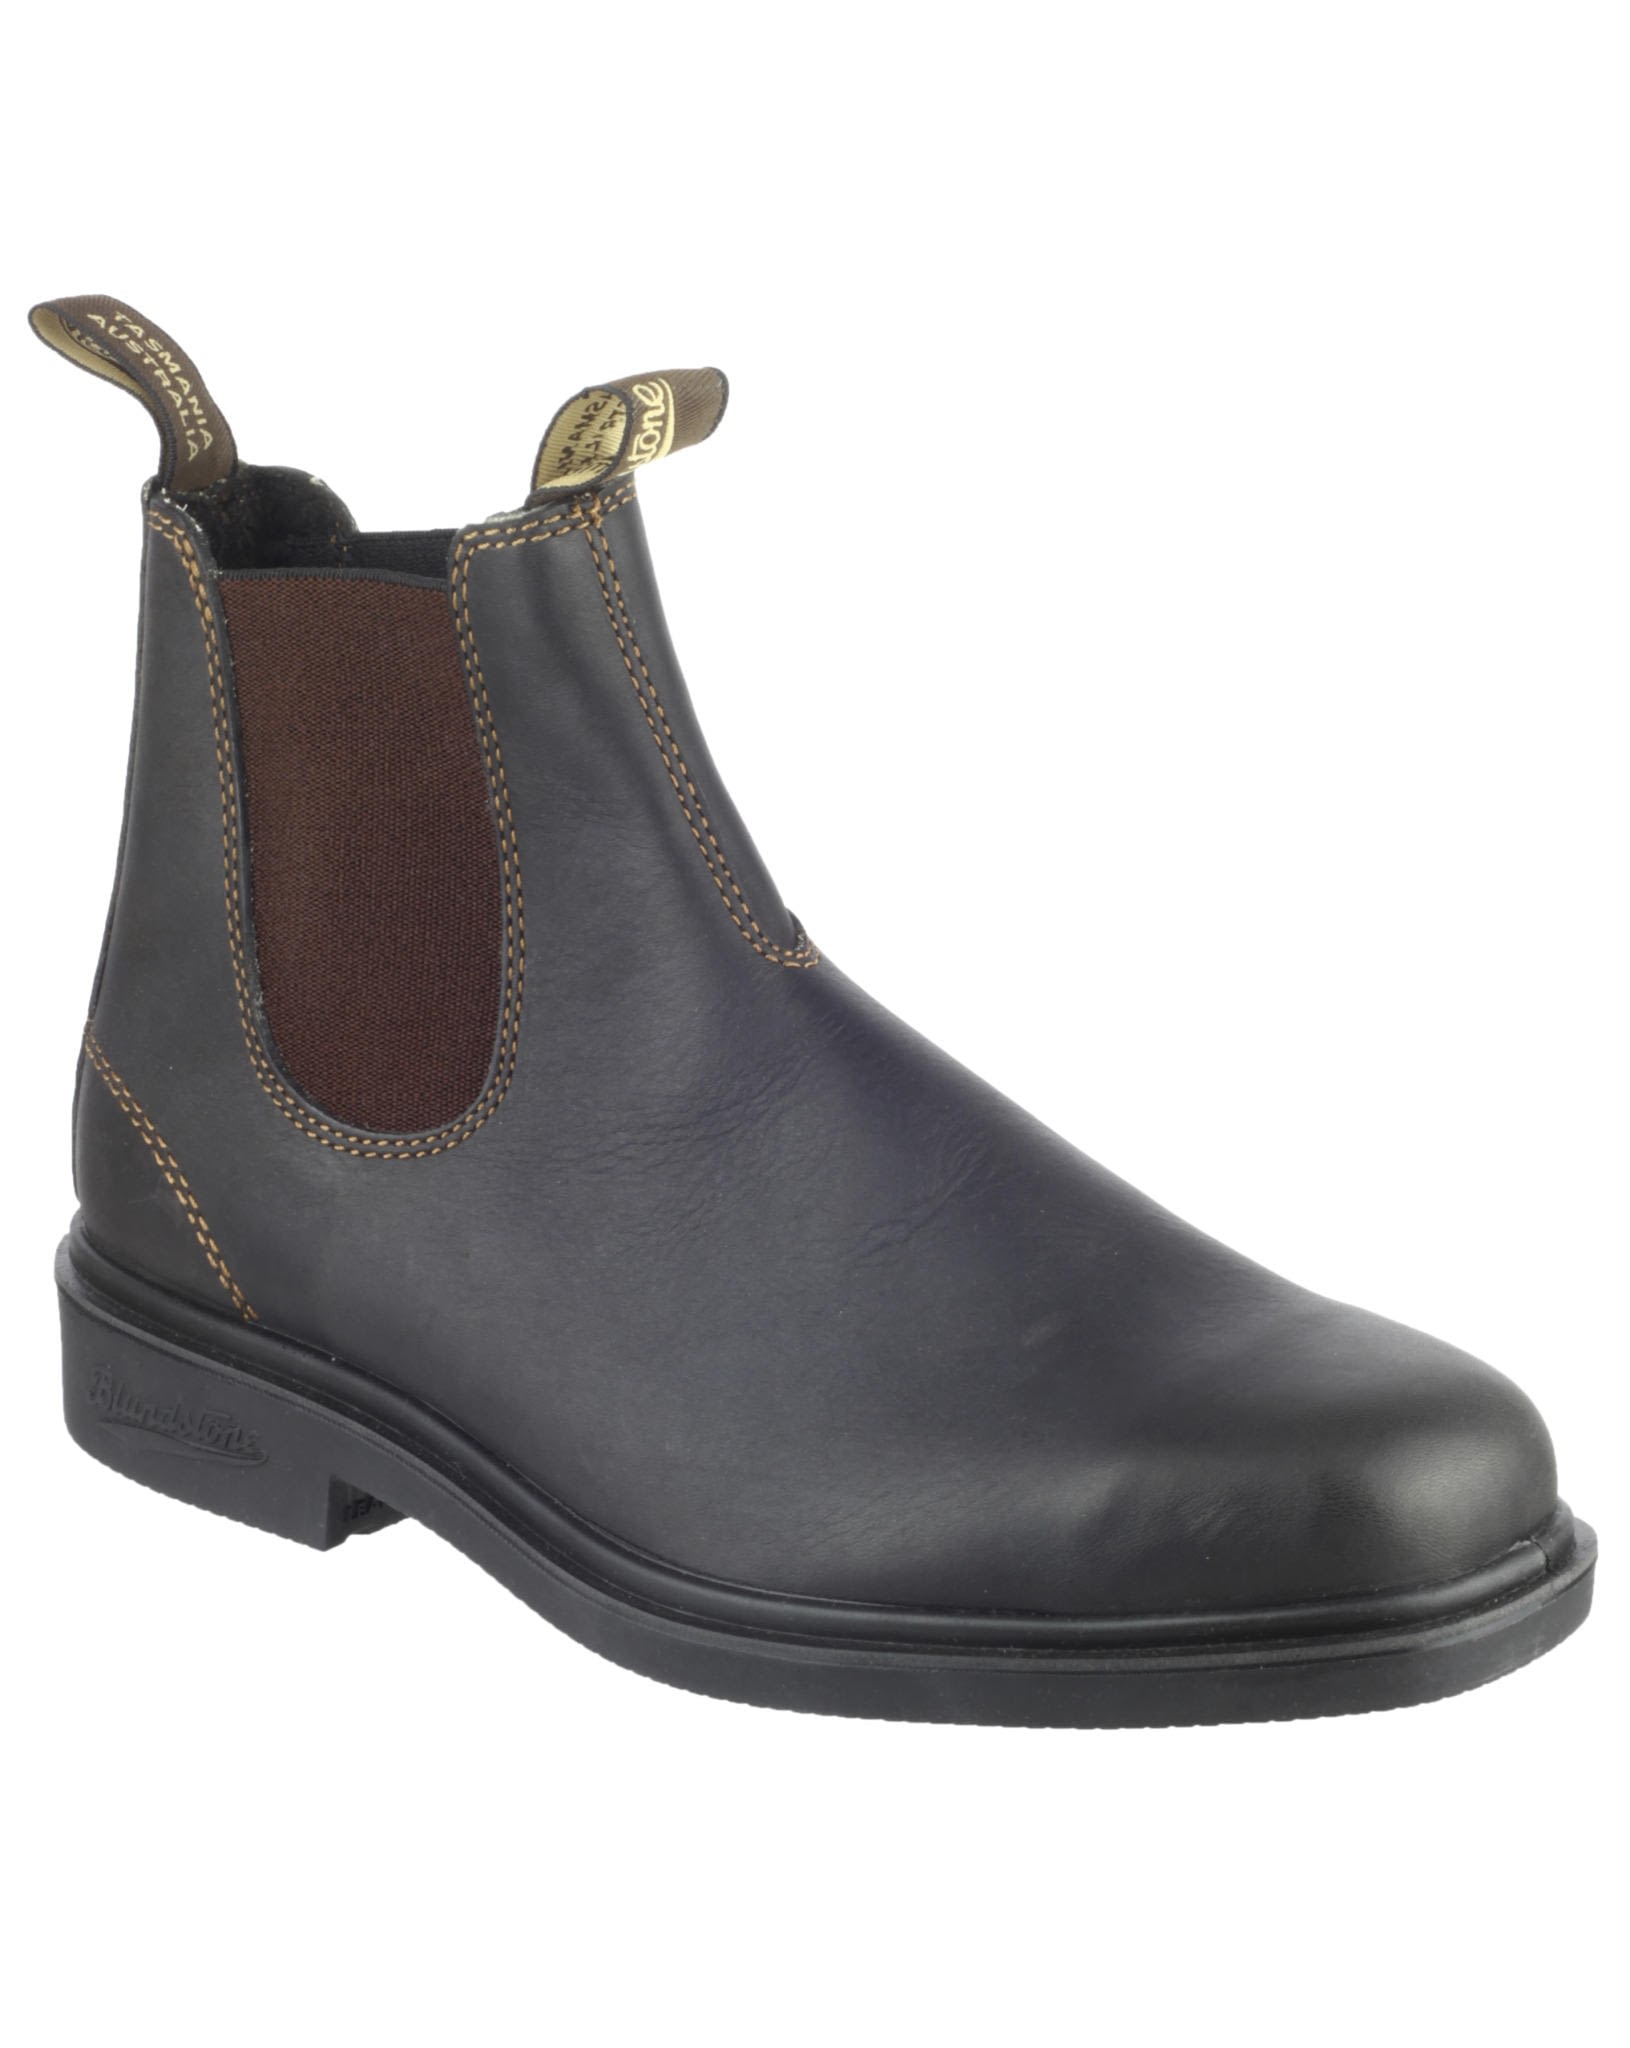 Blundstone 062 Dress Boot in Heritage Stout Brown